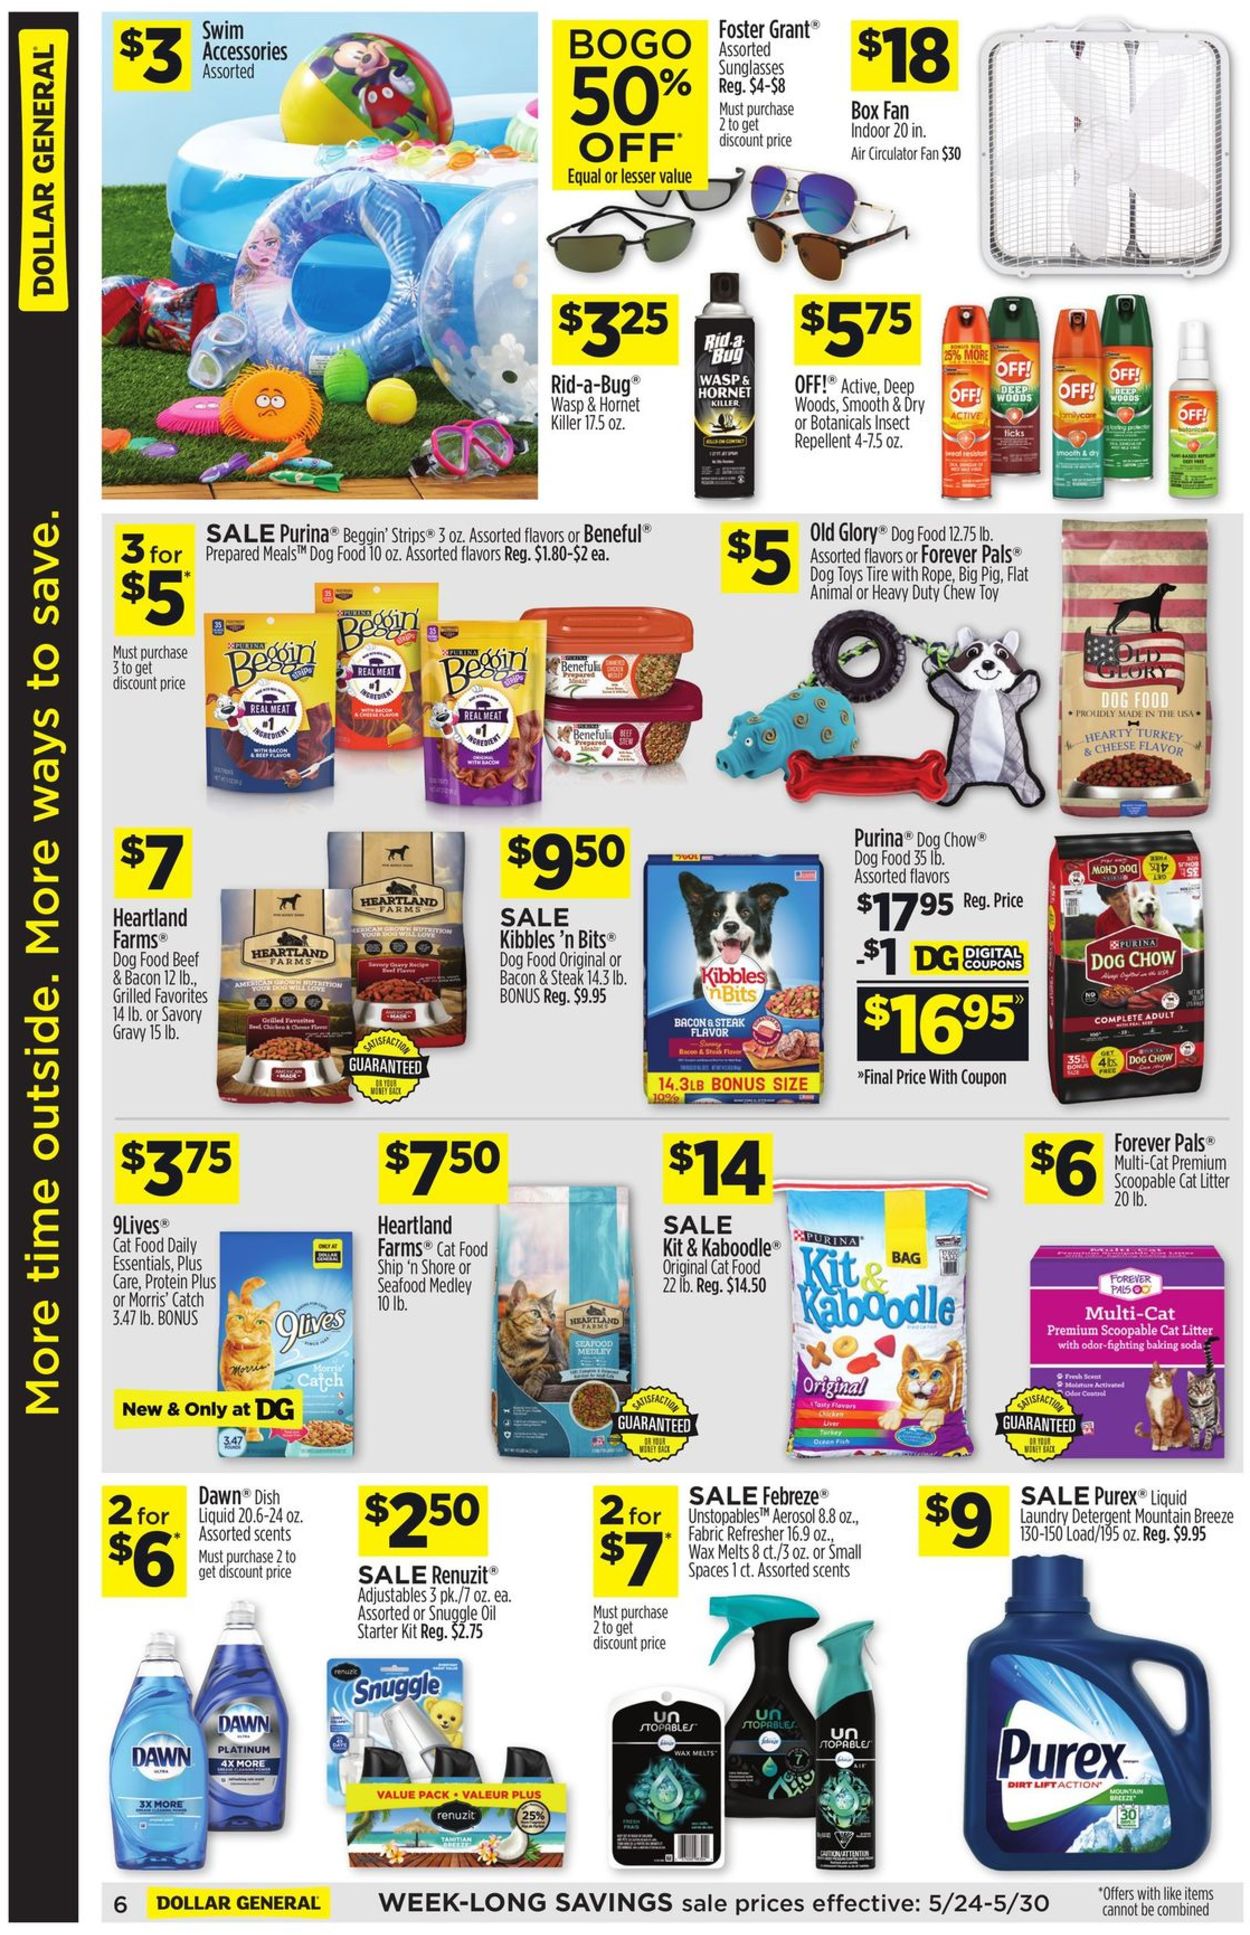 Dollar General Current weekly ad 05/24 - 05/30/2020 [13] - frequent-ads.com